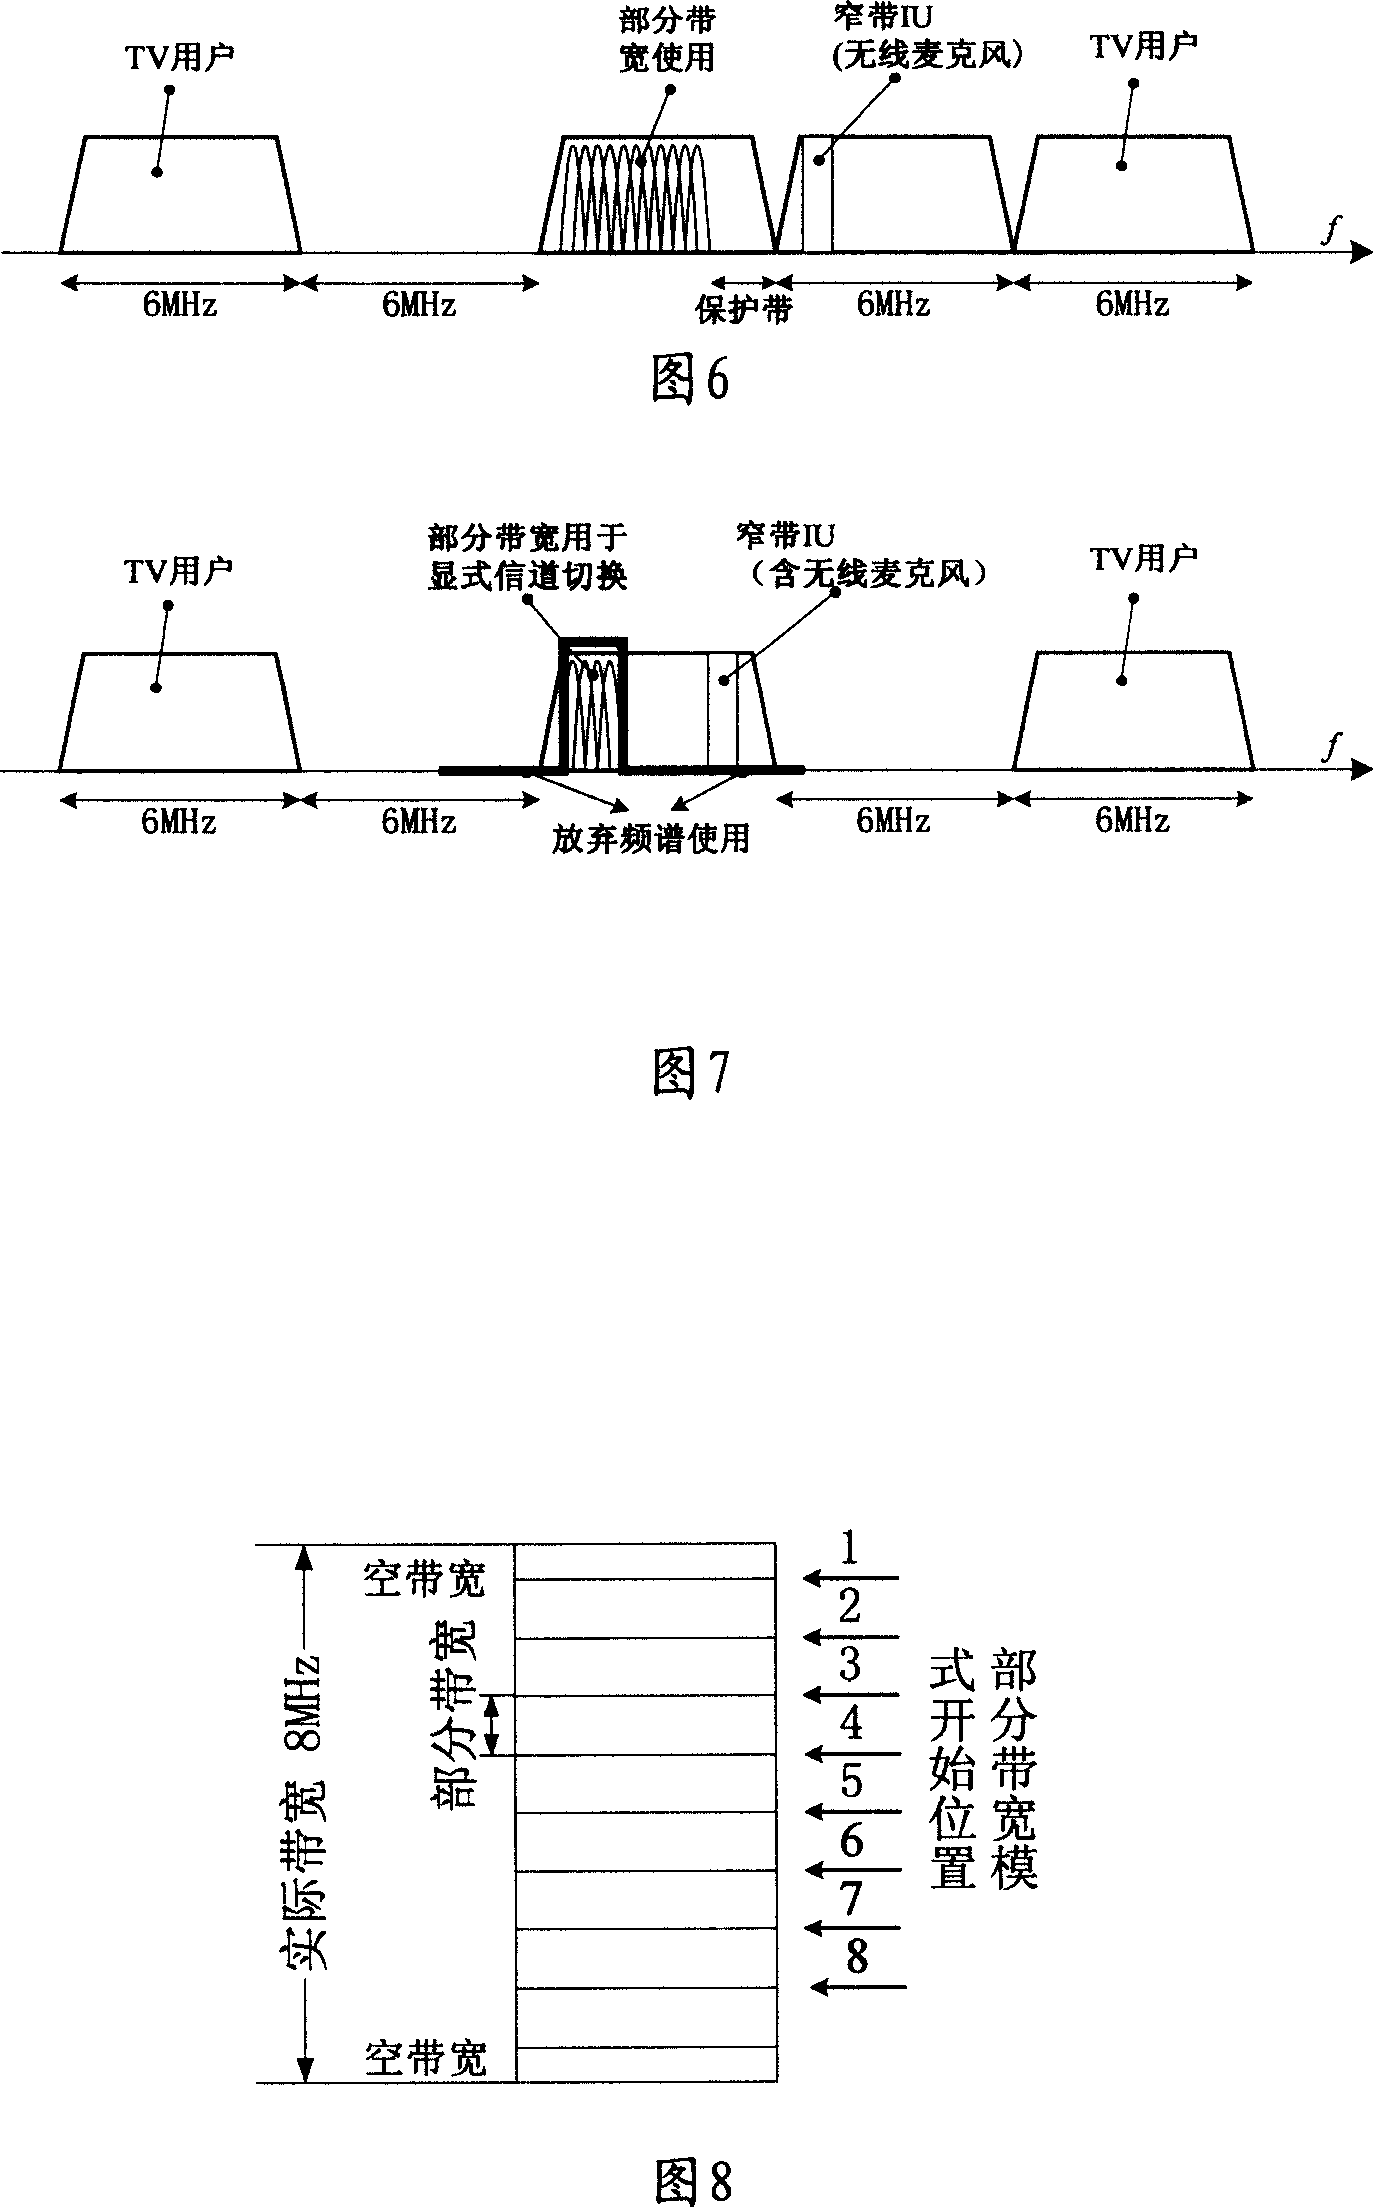 Use method and system of partial bandwidth in multi-carrier transmission system